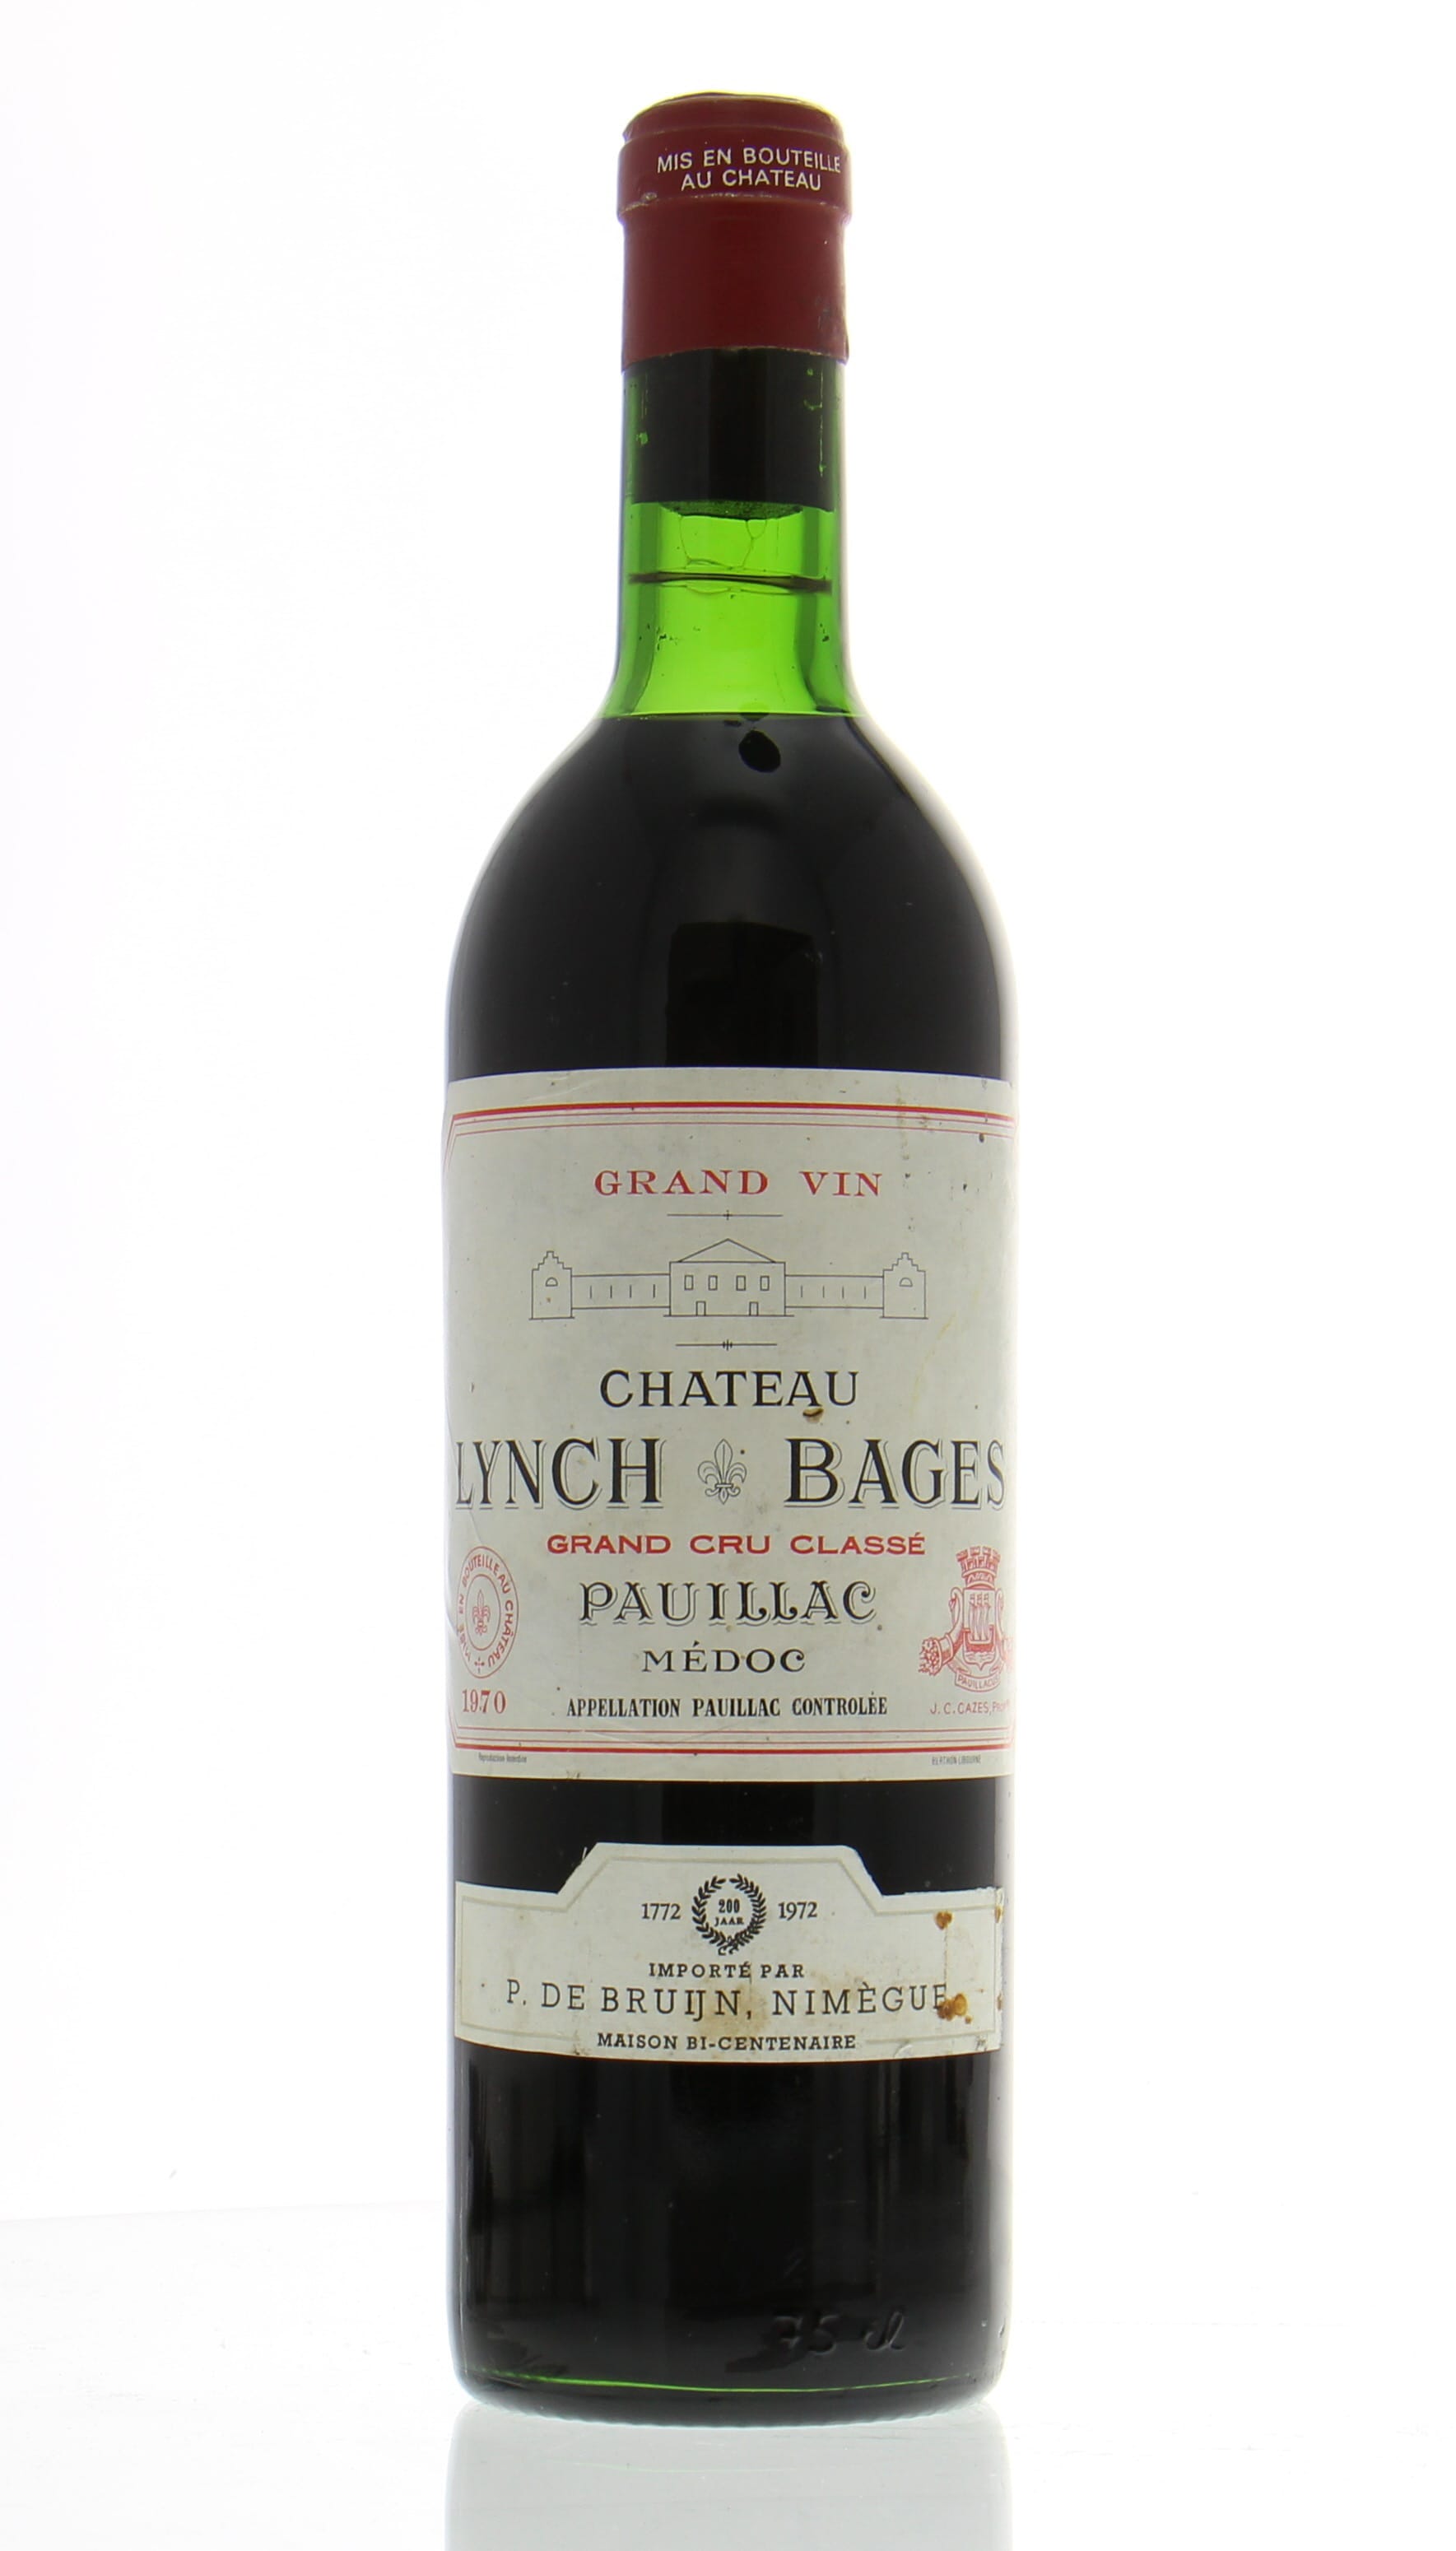 Chateau Lynch Bages - Chateau Lynch Bages 1970